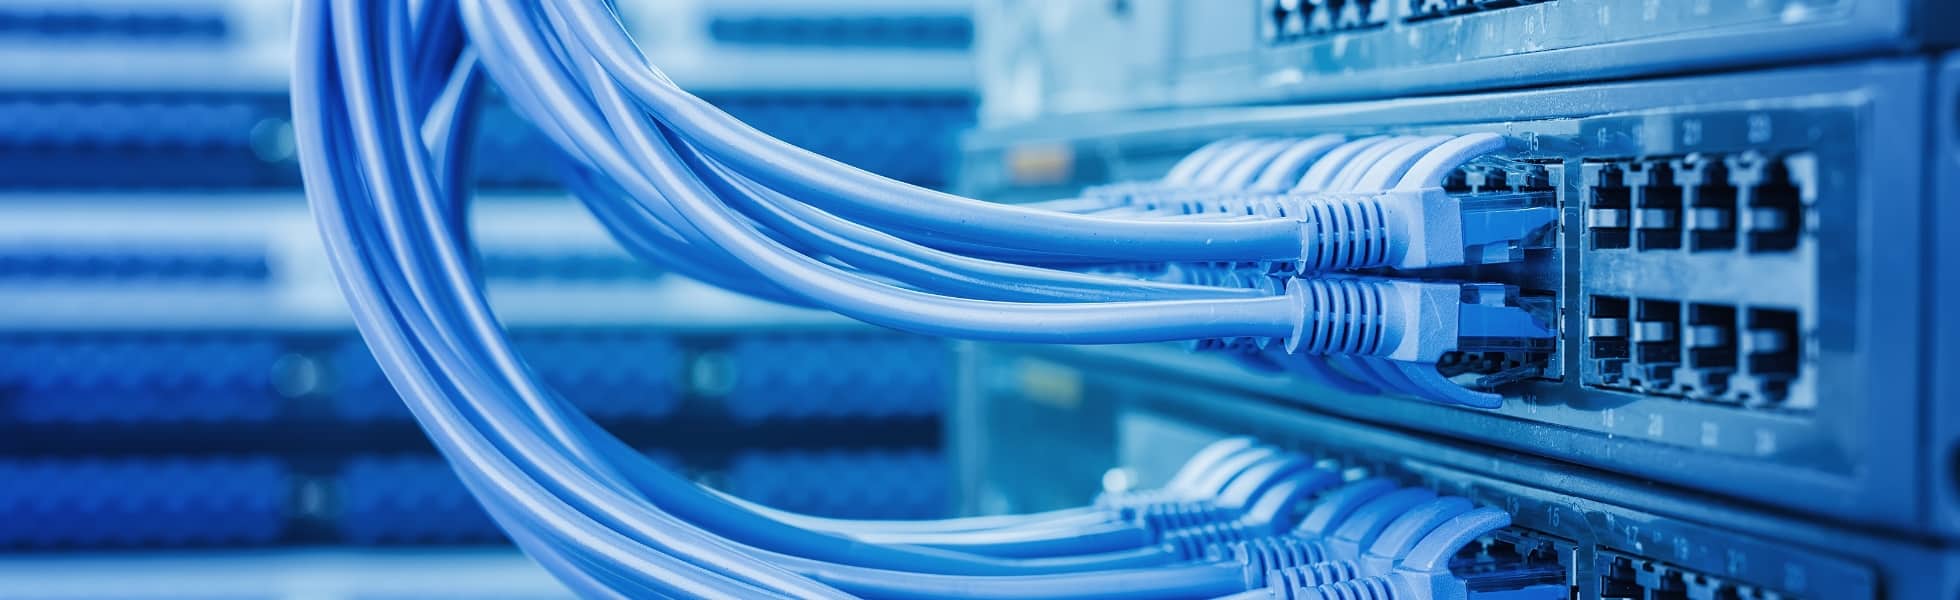 Breaking Down Network Cable Categories: What You Need to Know